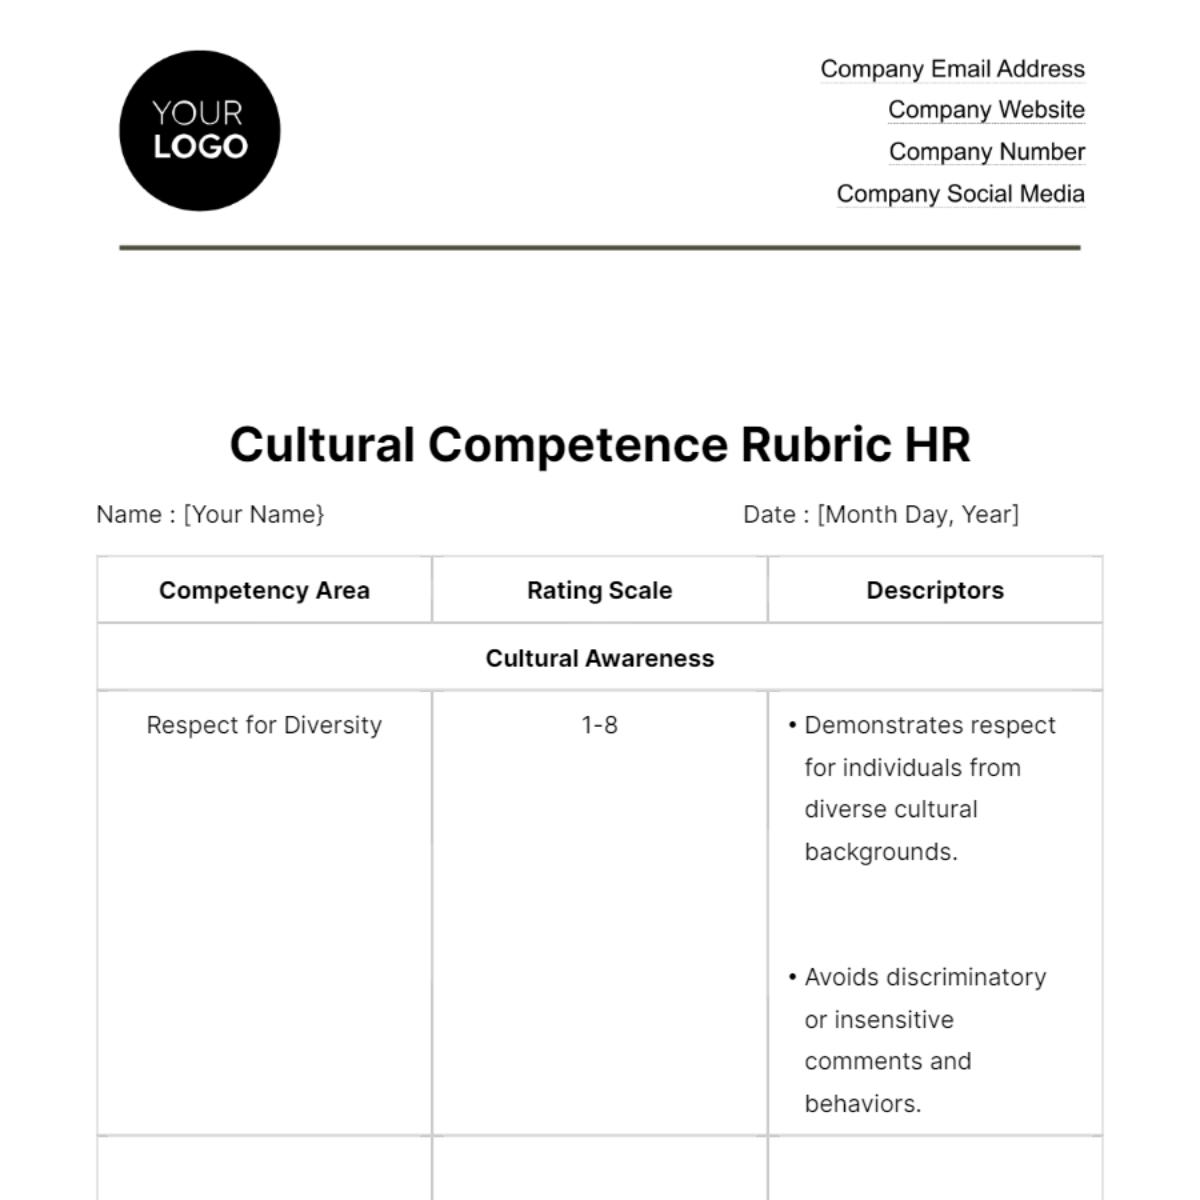 Cultural Competence Rubric HR Template